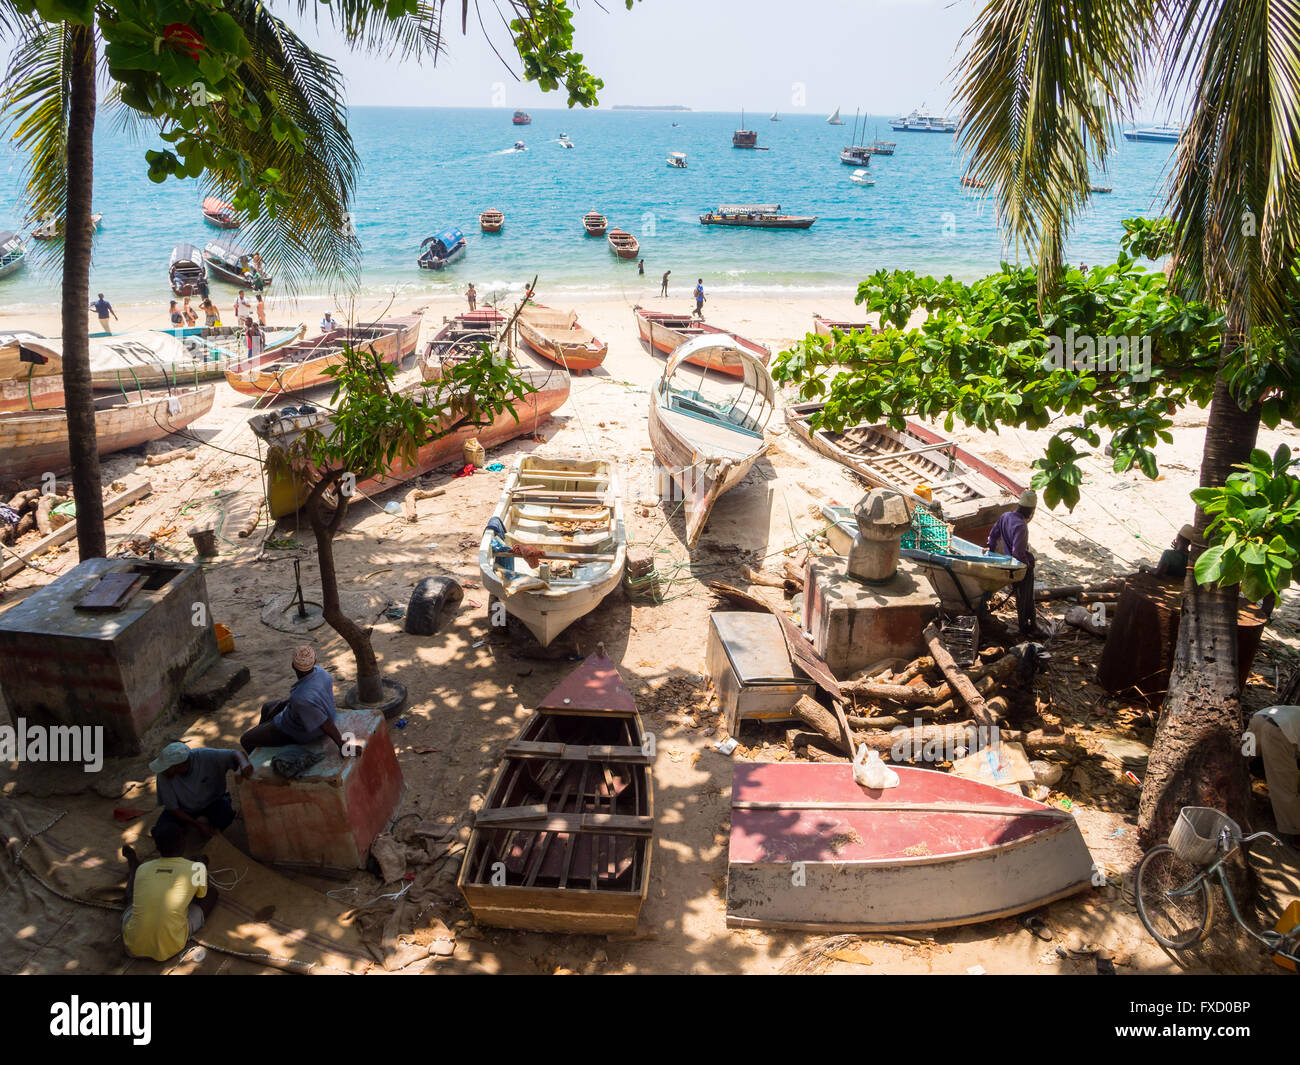 Local people with their boats on the seashore in Stone Town, Zanzibar. Stock Photo